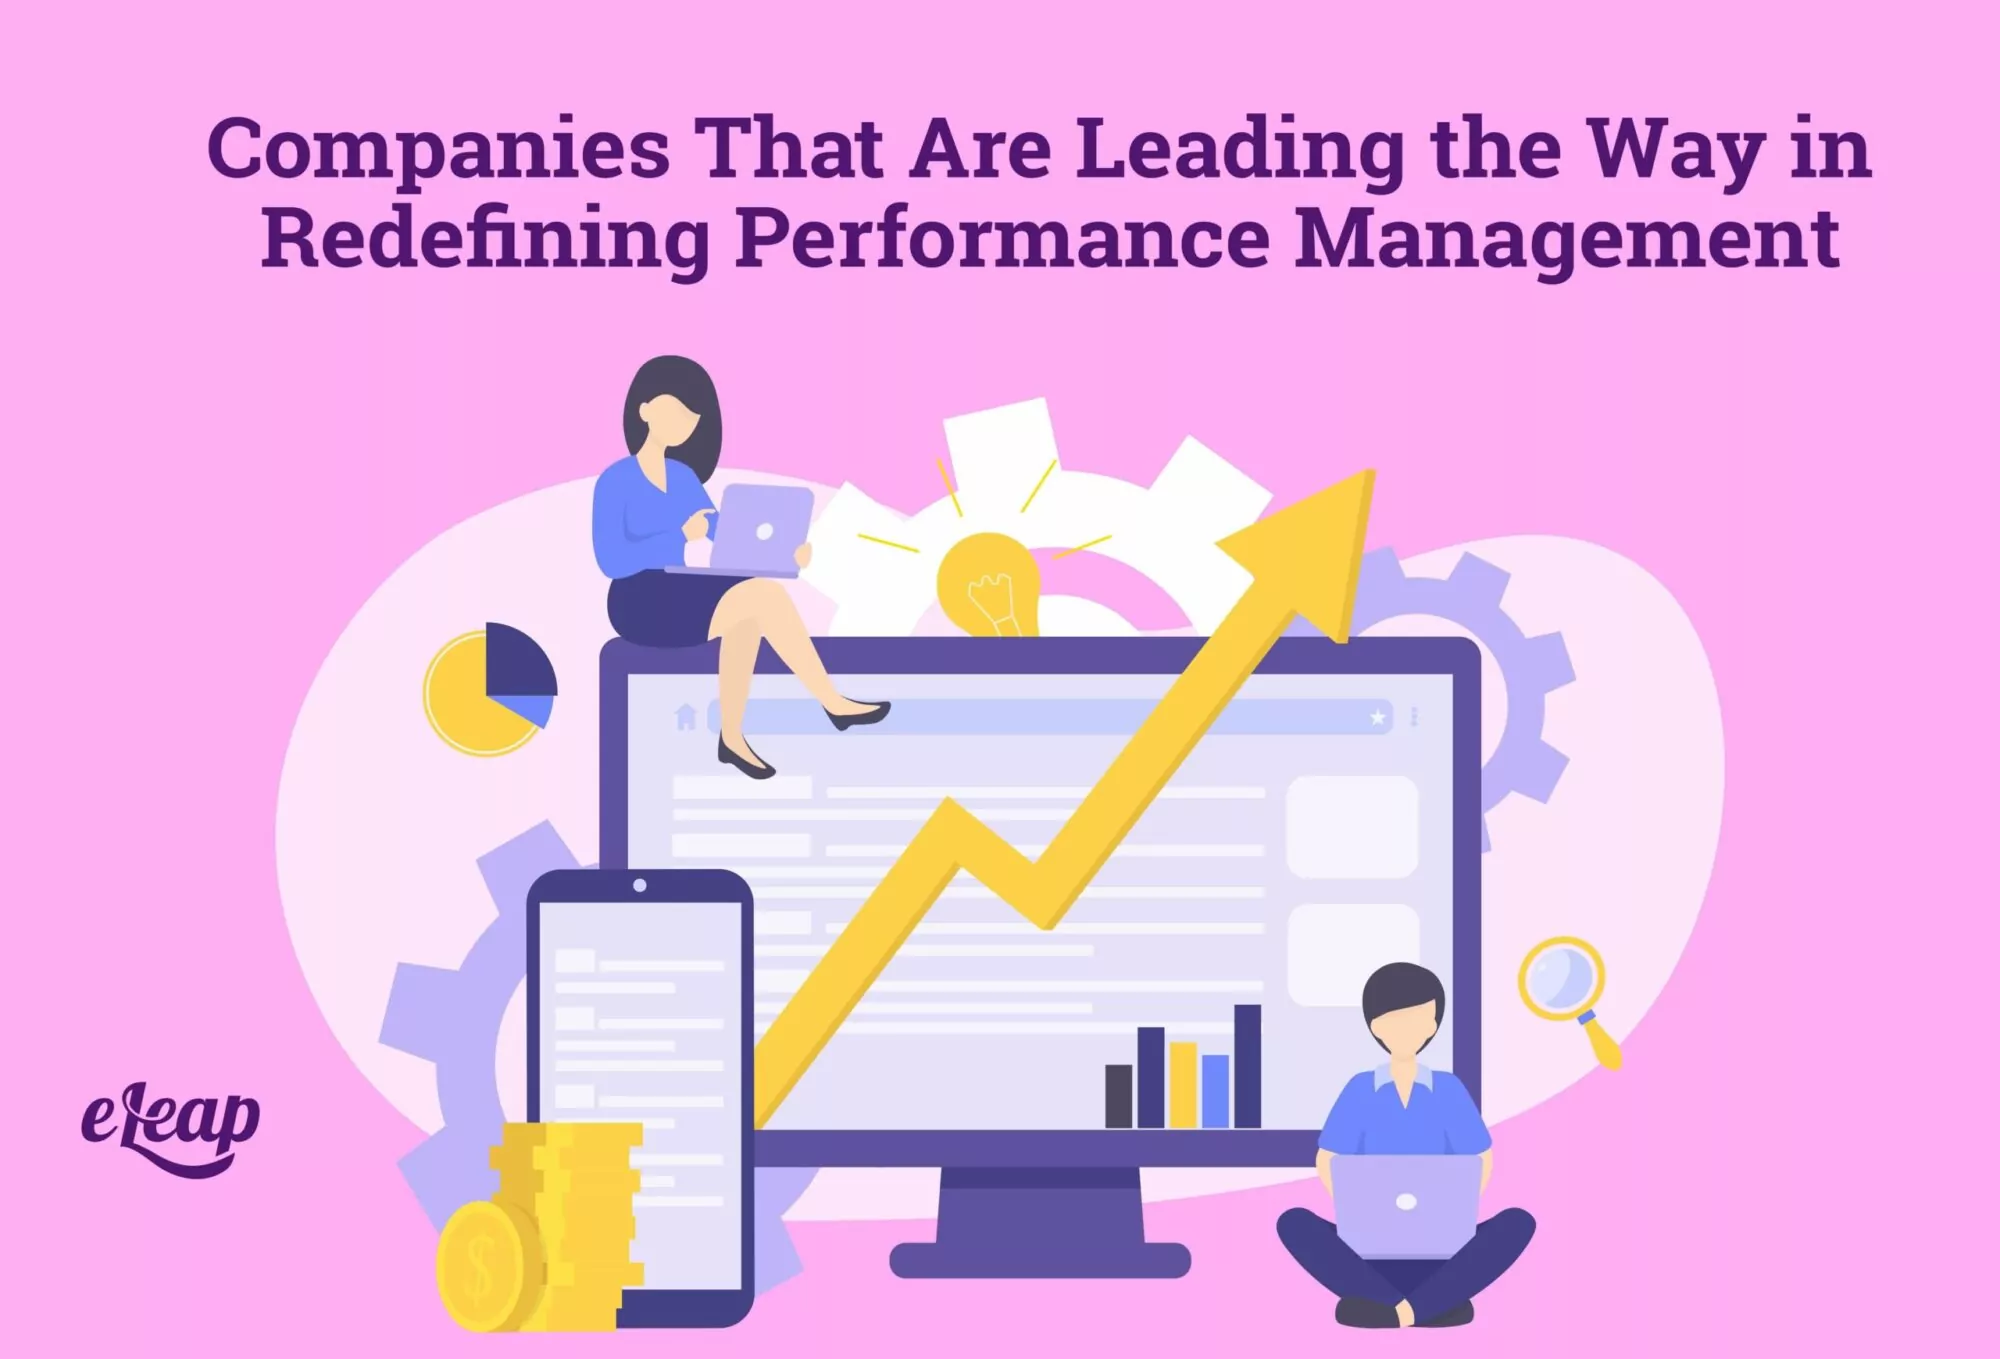 Companies That Are Leading the Way in Redefining Performance Management